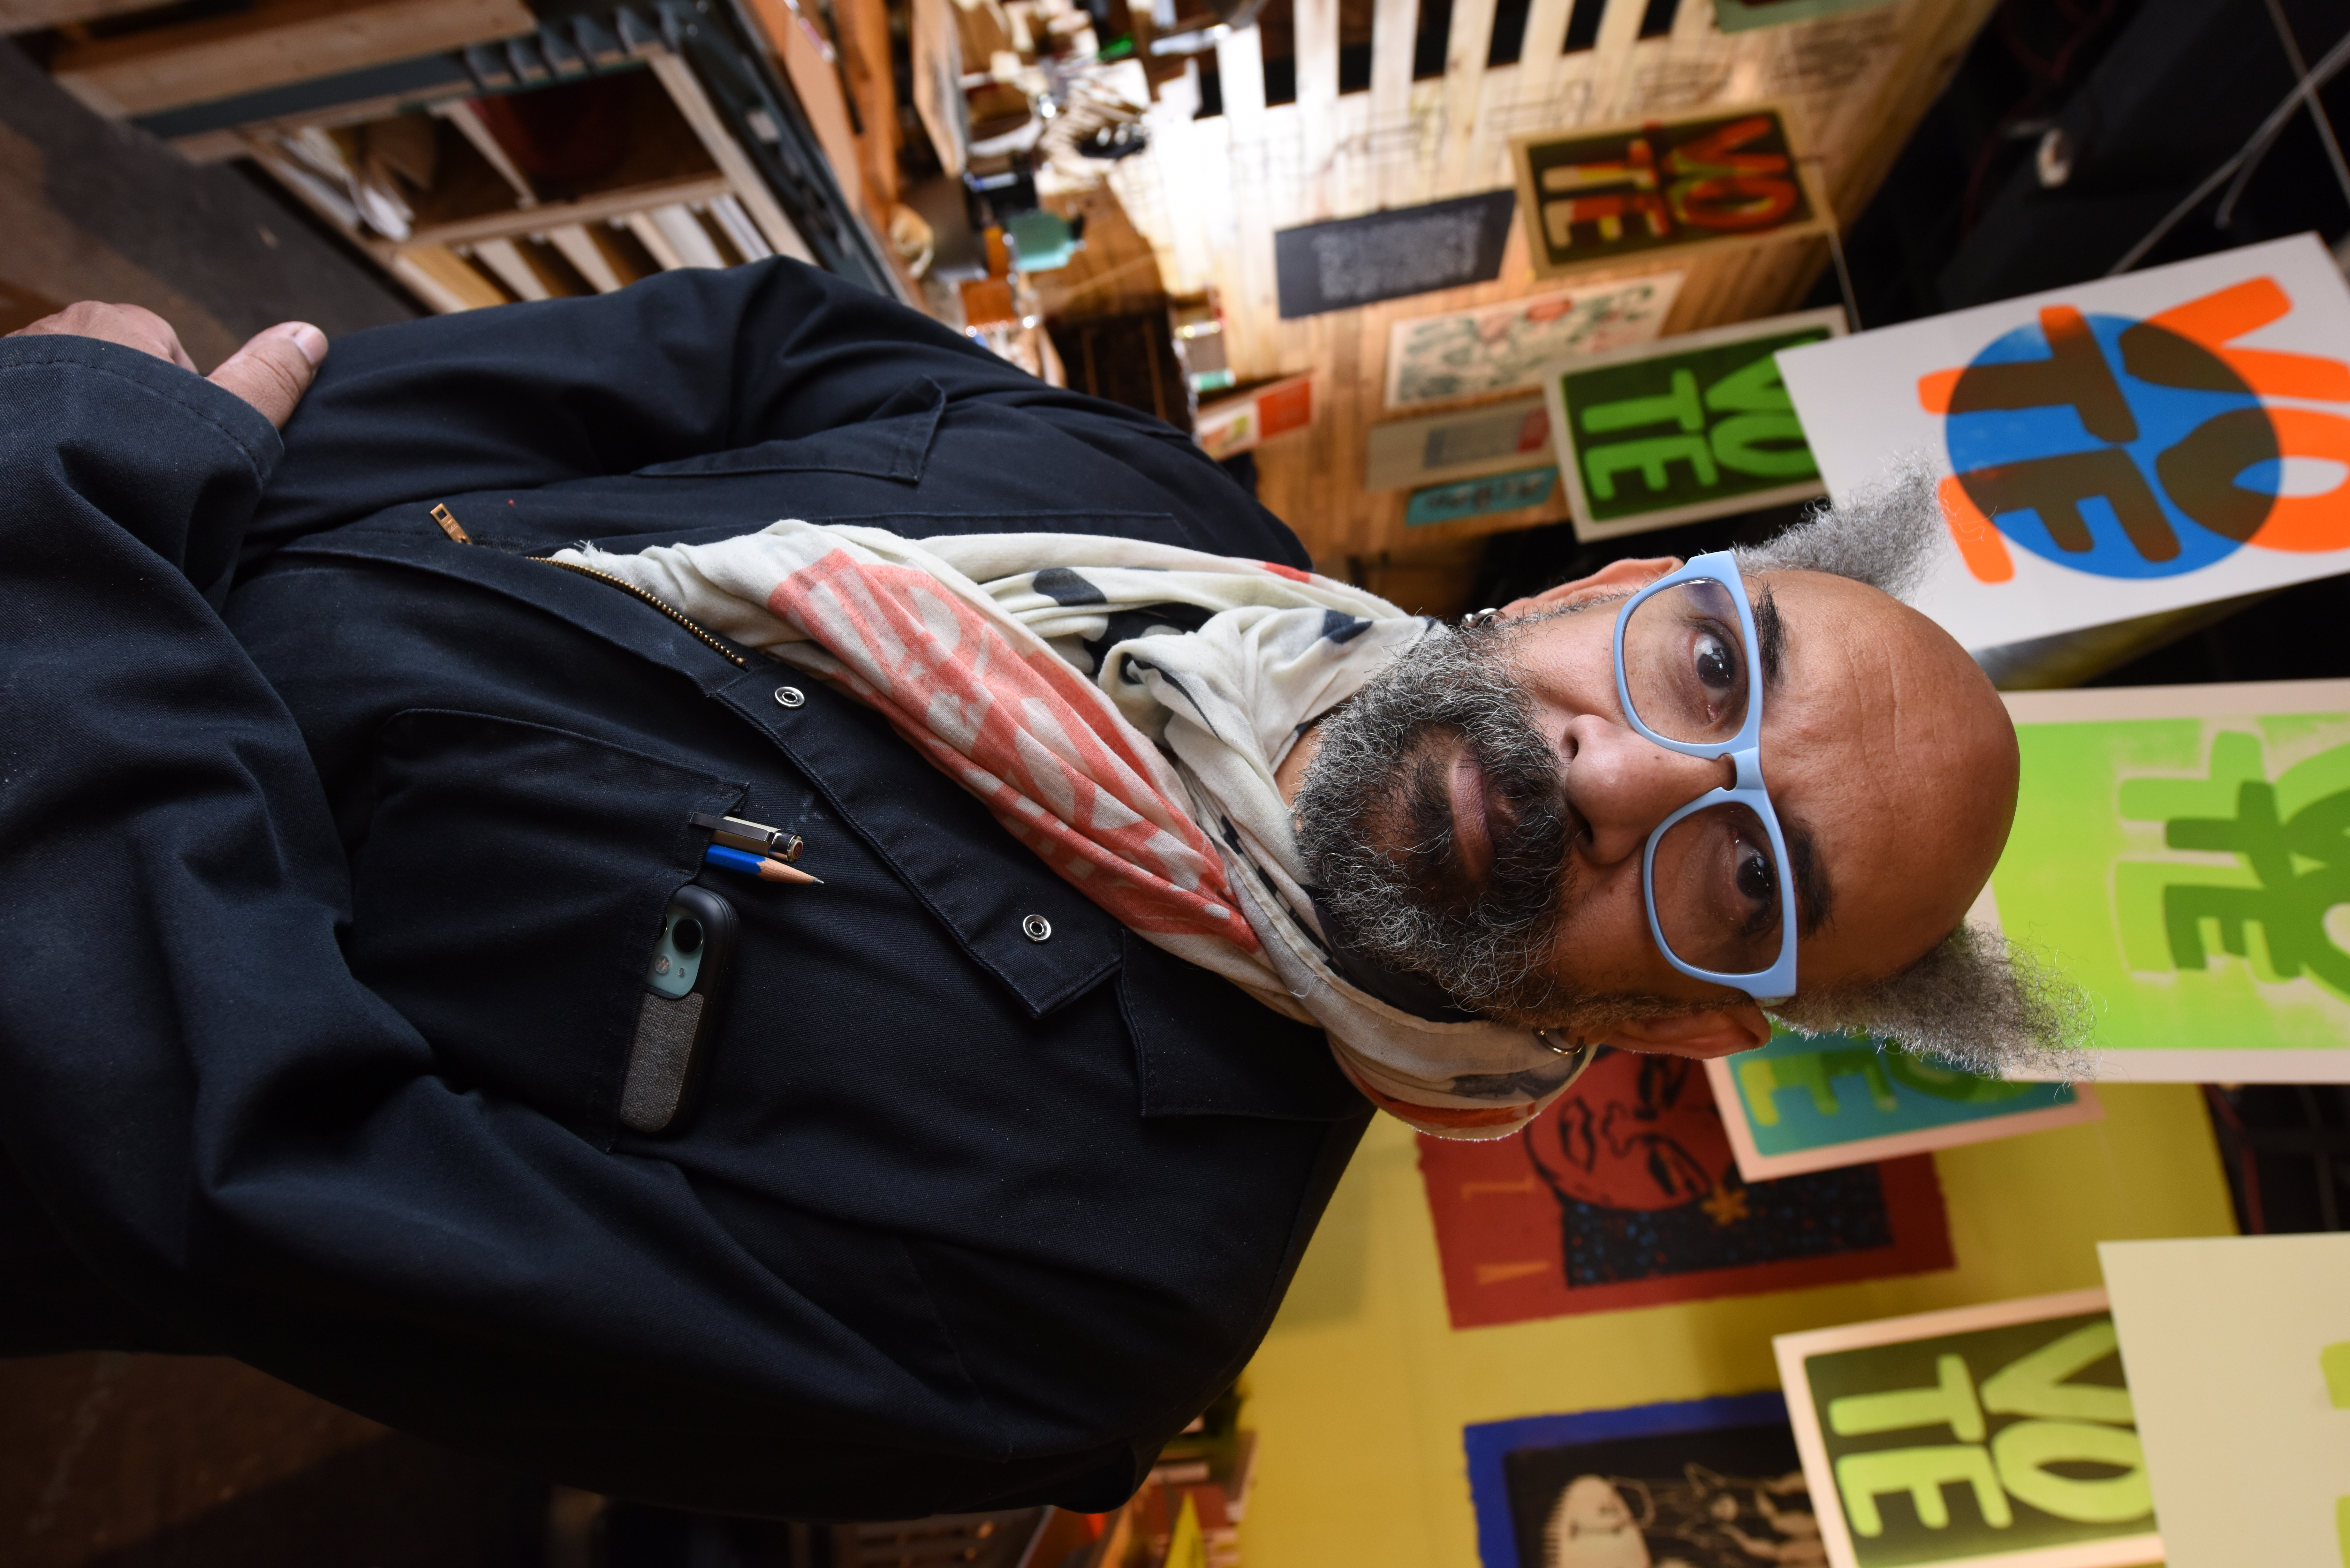 Image of artist Rick Griffith. He wears periwinkle glasses, a scarf, and has a beard. He stands in front of colorful posters that say "Vote" on them.